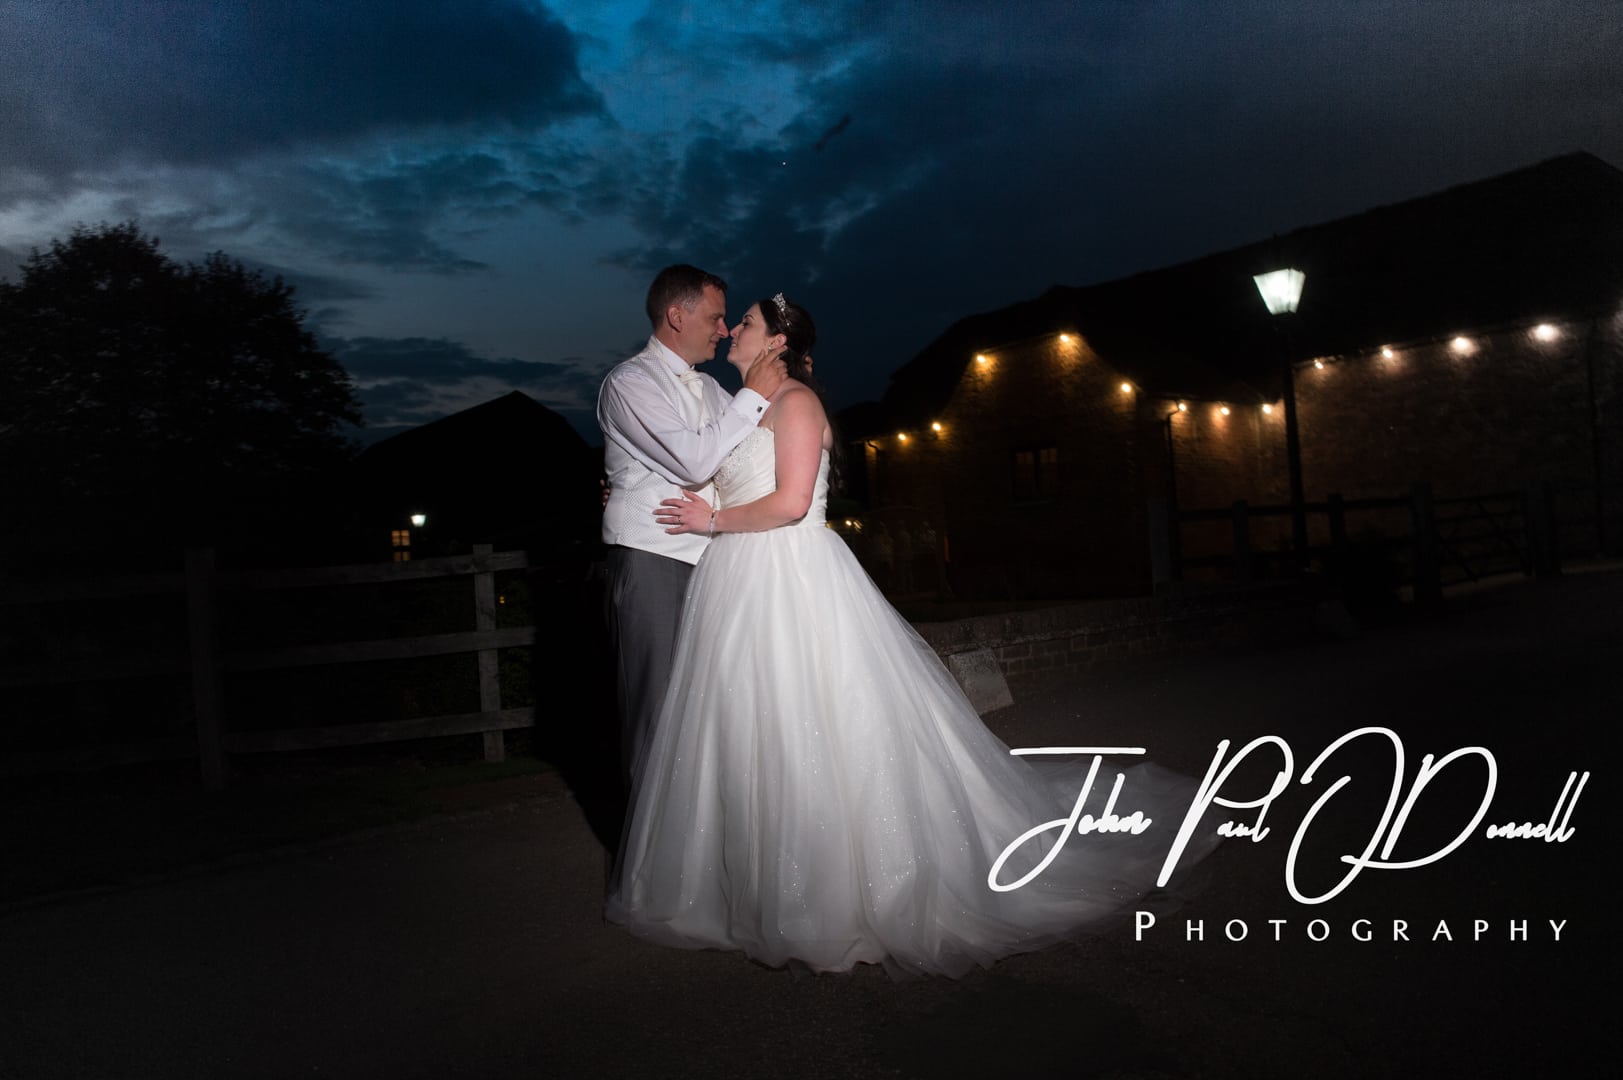 Claire and Stuarts wedding at Tewinbury Farm Herts